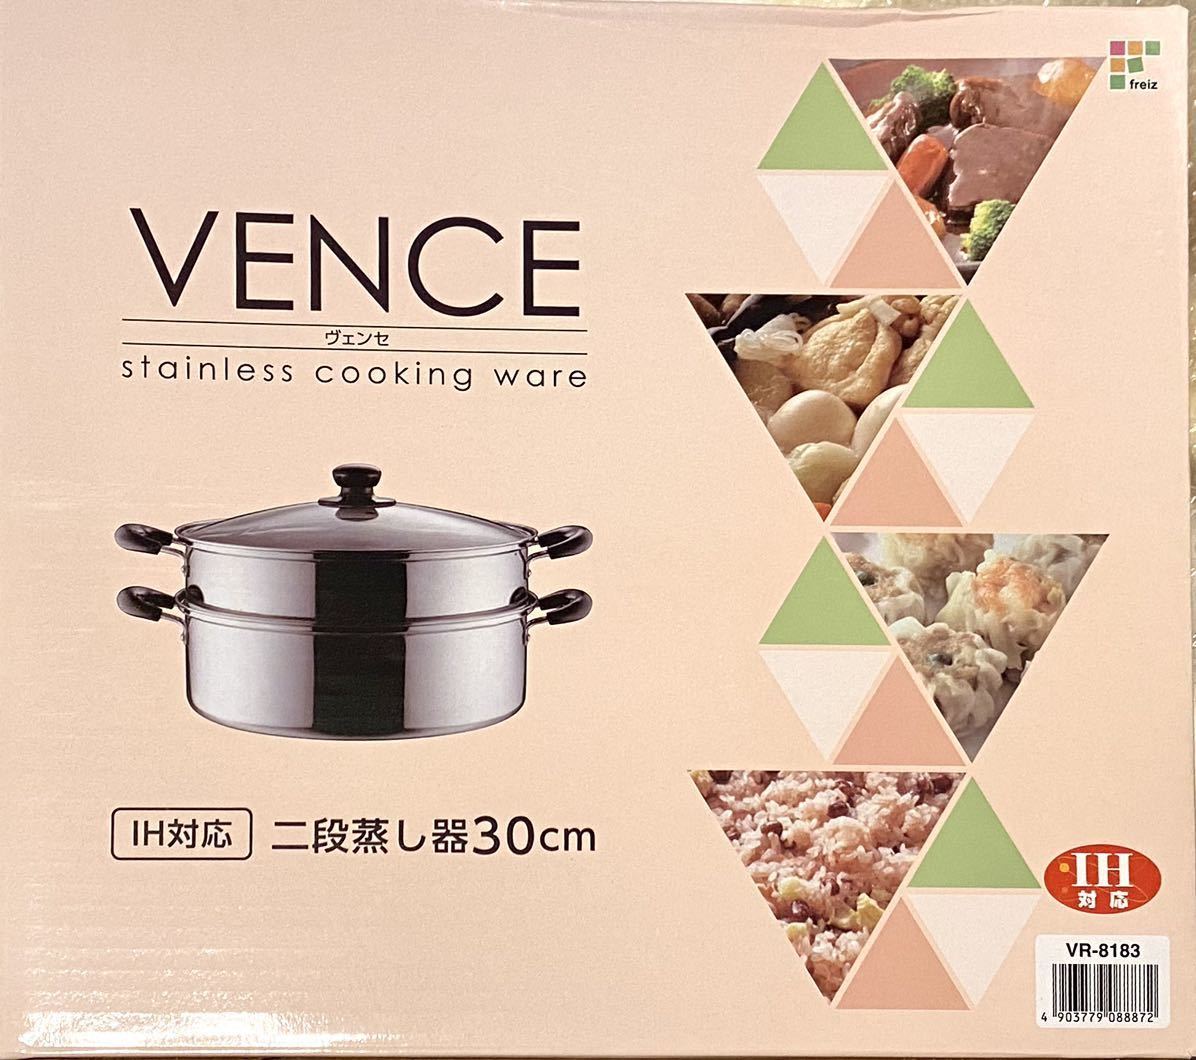  peace flat f Rays (Wahei freiz) two step steamer vense30cm glass cover attaching IH correspondence stainless steel VR-8183 new goods 